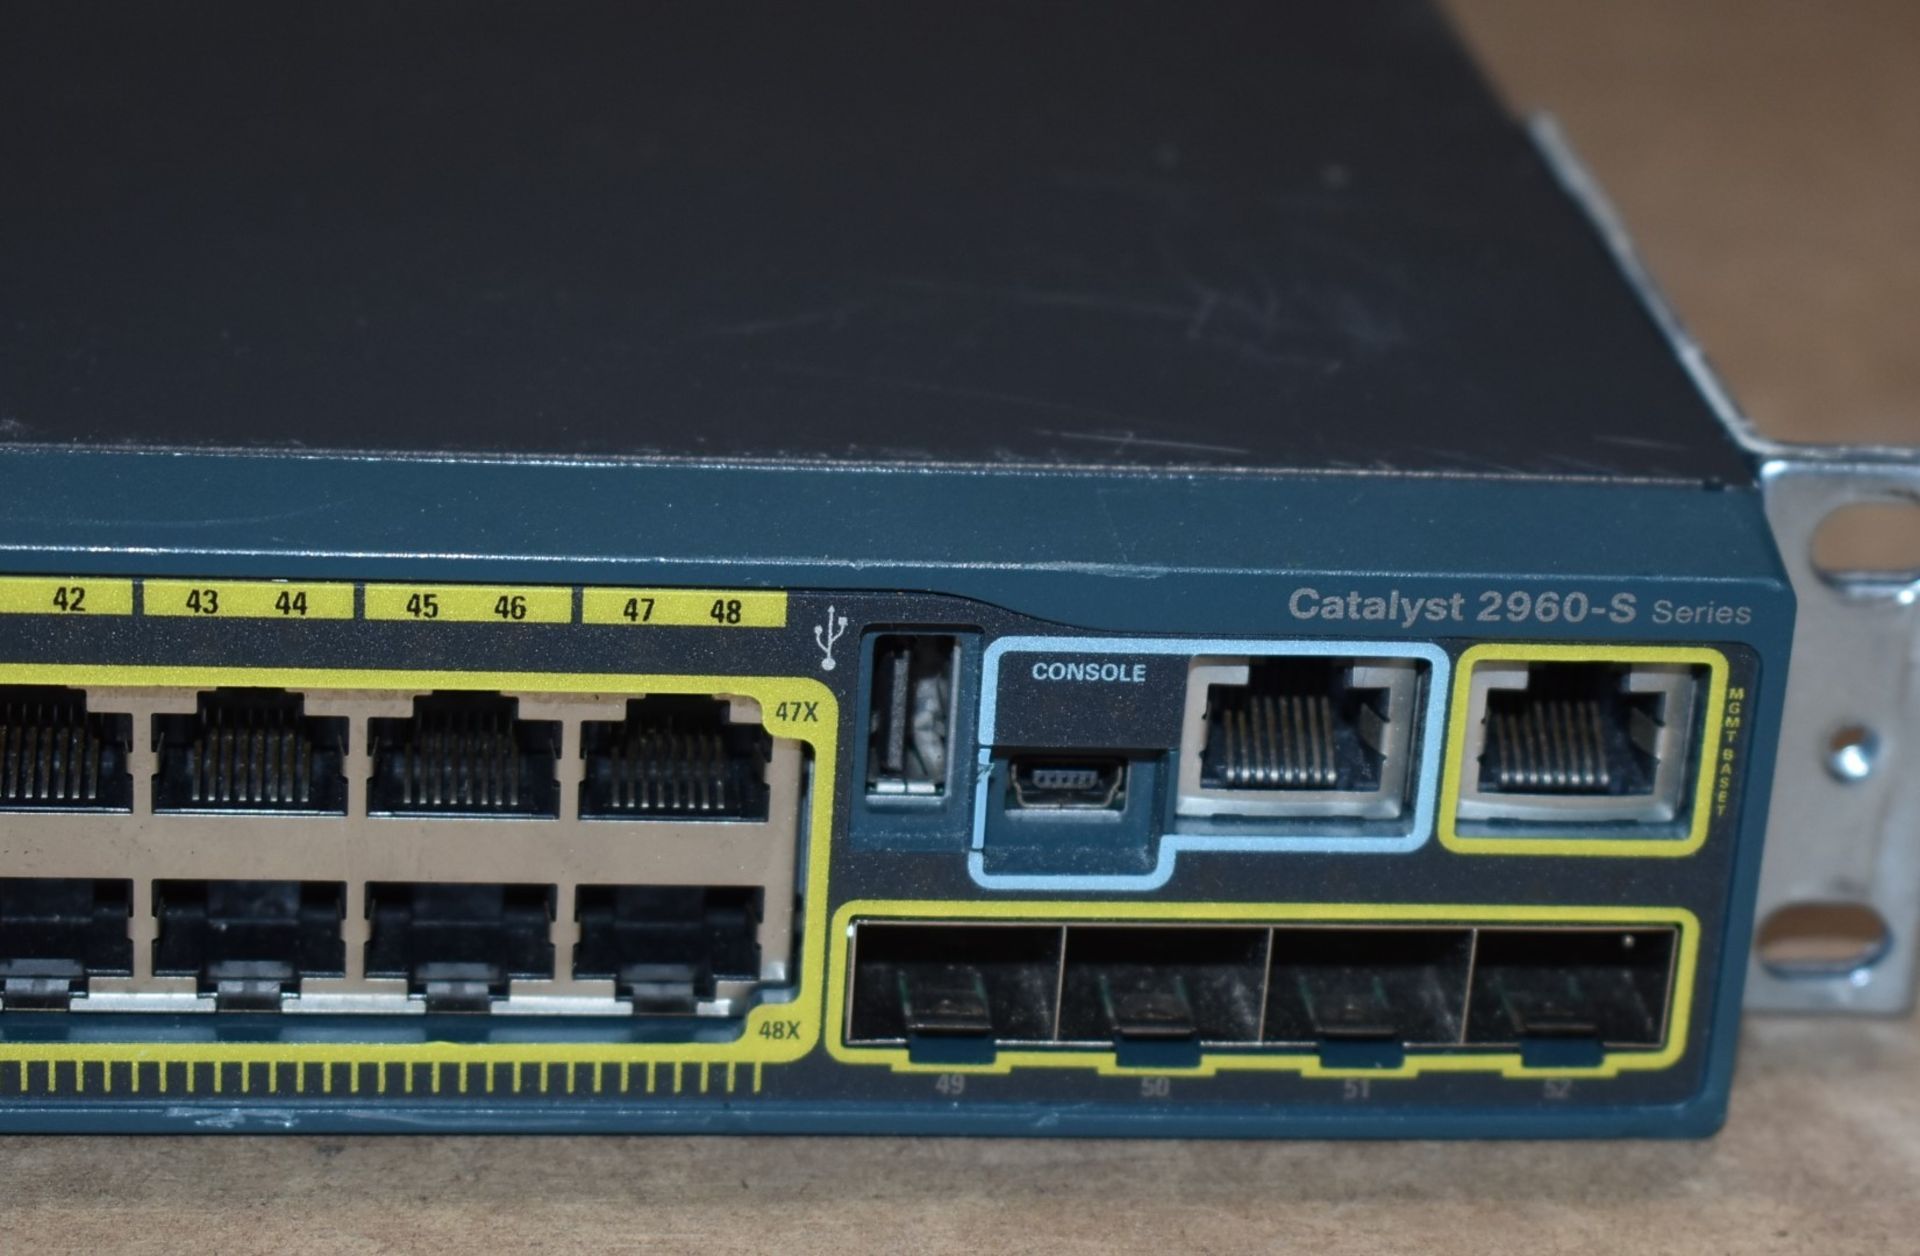 1 x Cisco Catalyst 2960S 48 Port Switch - Includes Power Cable - Ref: MPC114 CA - CL678 - - Image 6 of 6